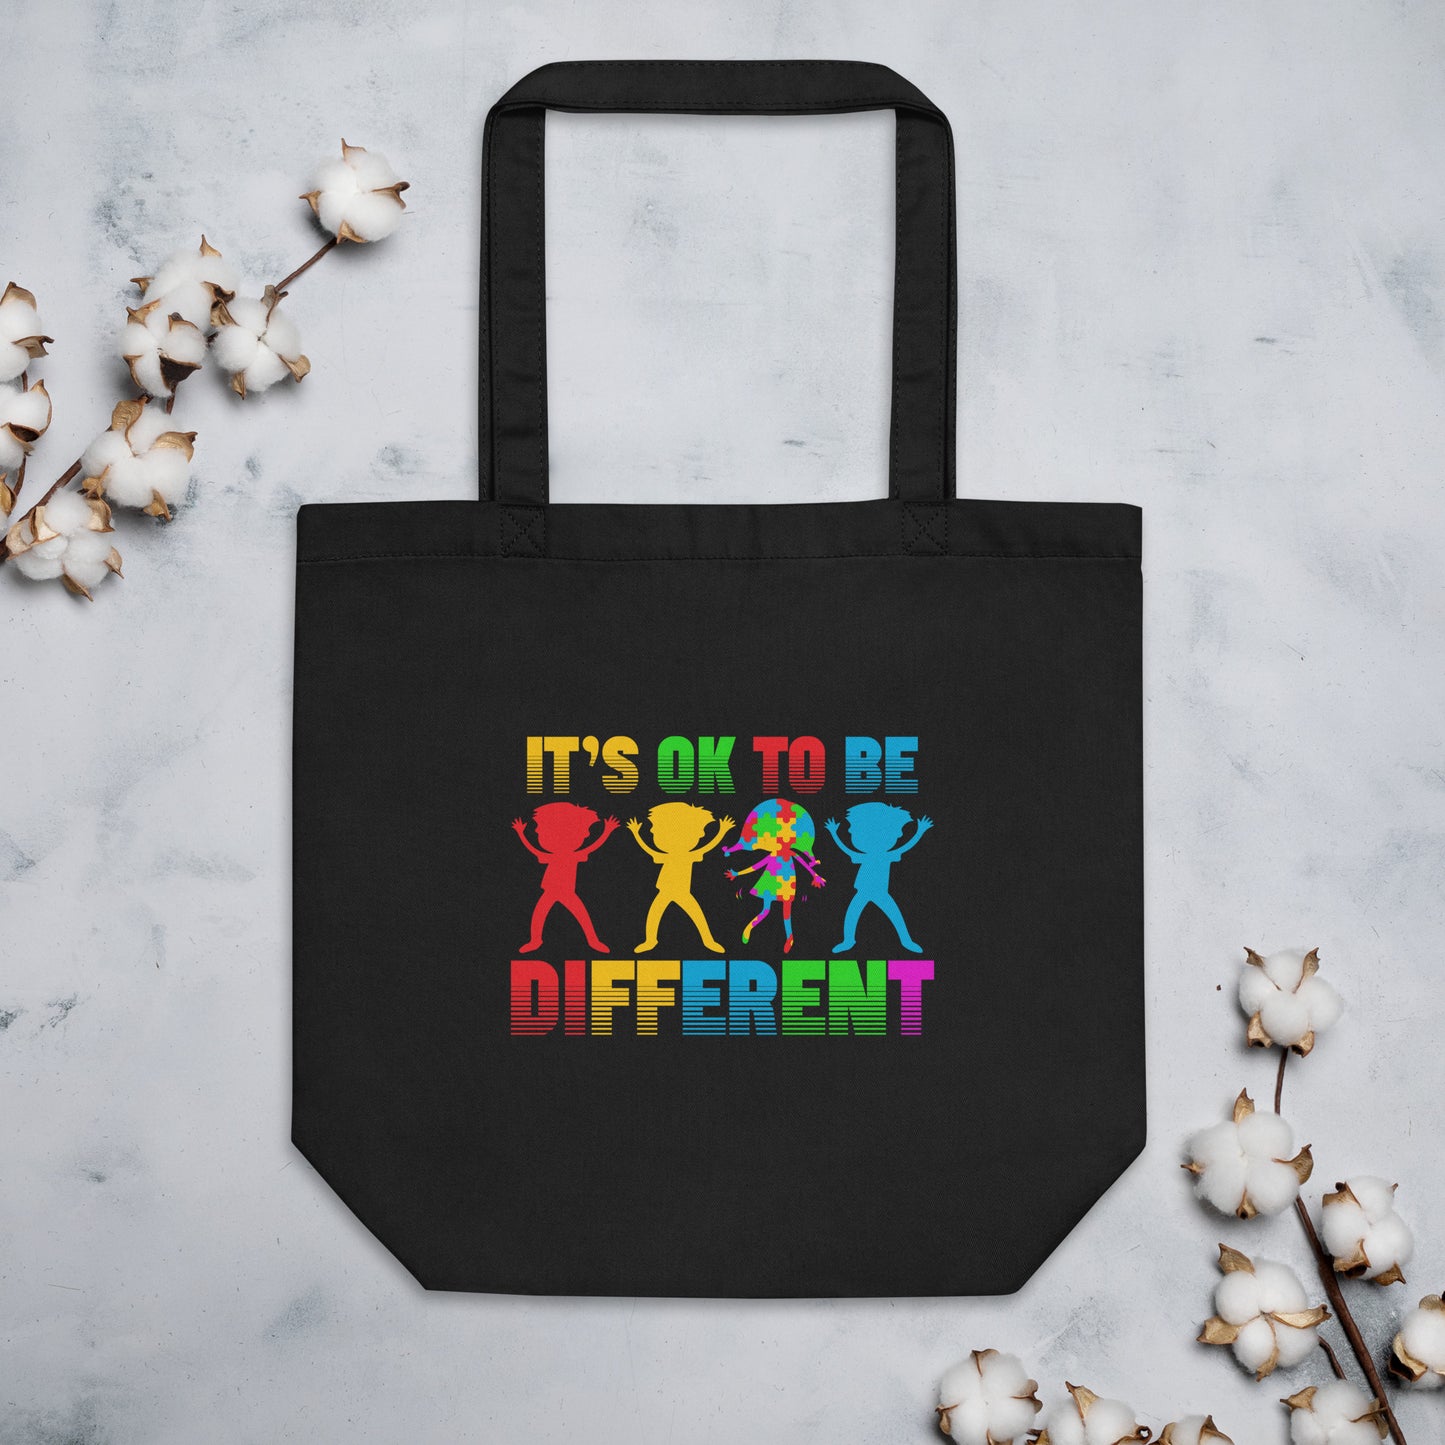 It's Ok to be Different Eco Tote Bag